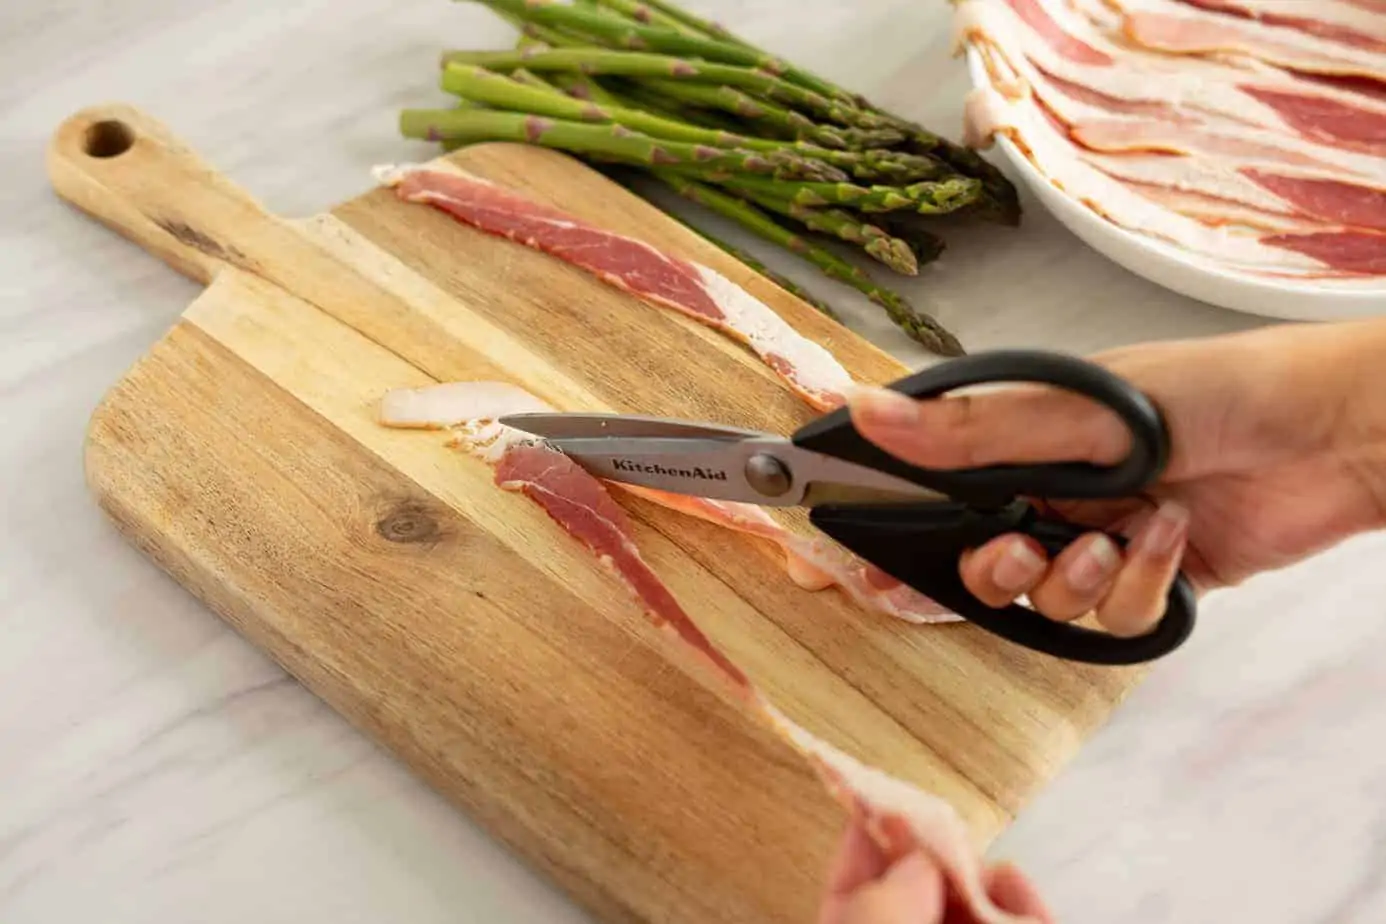 cutting the bacon slices with kitchen shears.